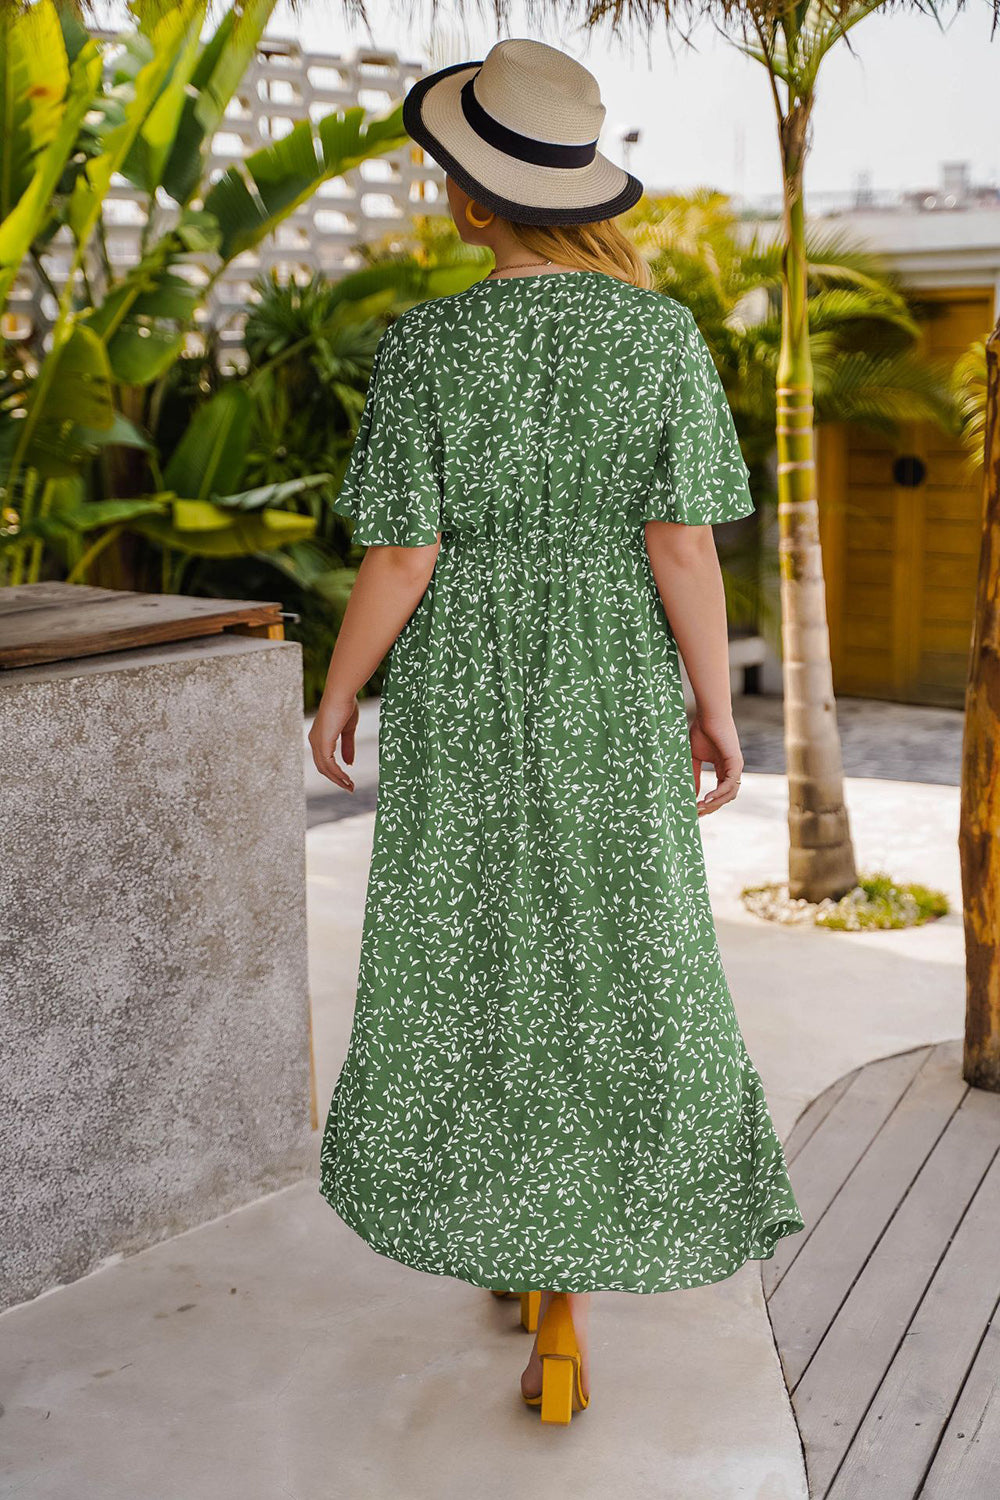 Green V Neck Printed Plus Size Summer Dress With Short Sleeves